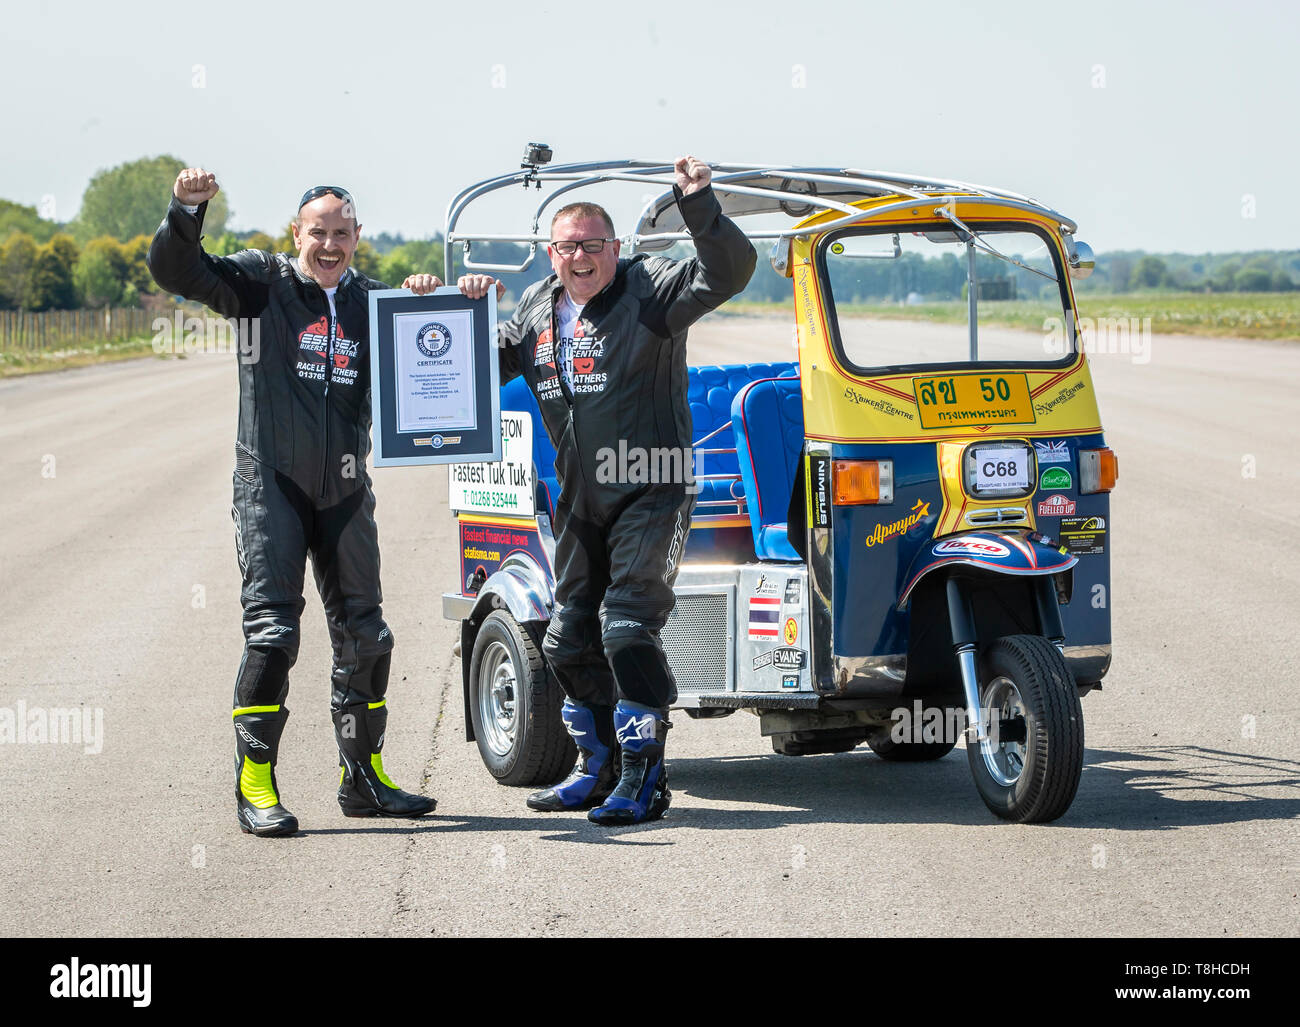 Essex businessman Matt Everard (right) and passenger Russell Shearman celebrate their Guinness World Record after setting the world land speed record in a tuk tuk at Elvington Airfield in Yorkshire. Stock Photo